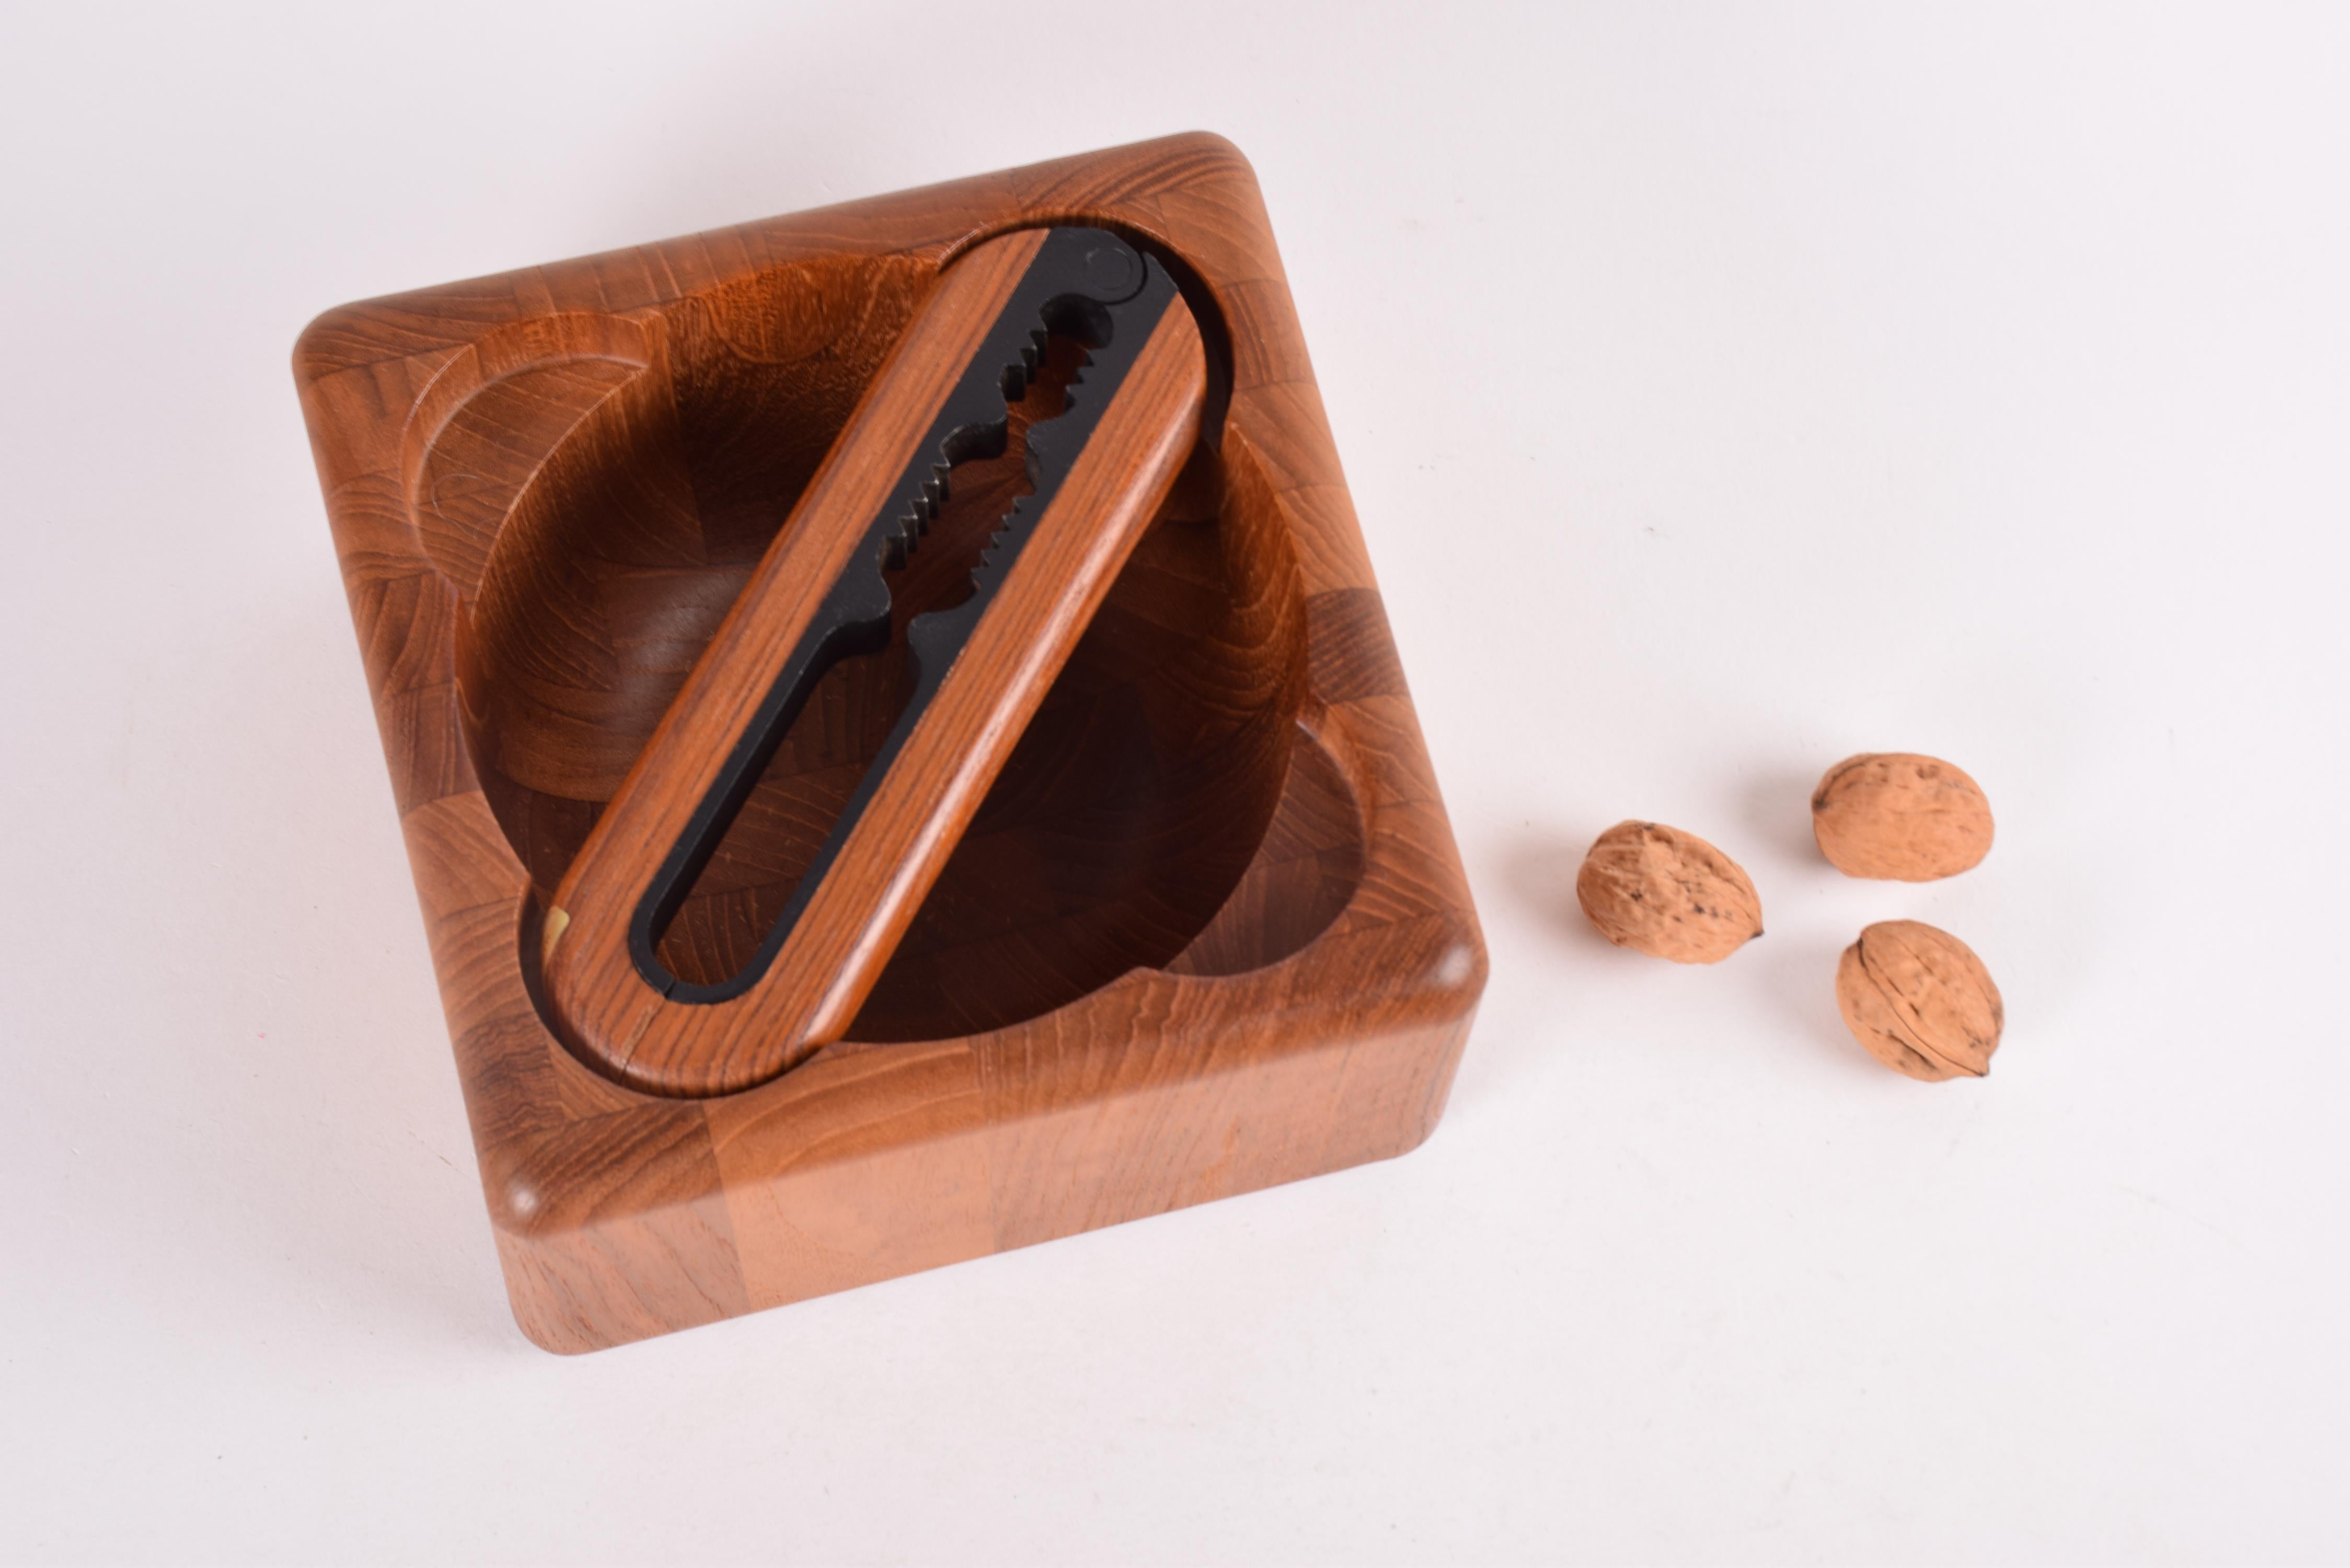 Midcentury Danish nutcracker and bowl made of solid staved teak. Designed by Flemming Digsmed for Danish wood manufacturer Richard Nissen, Langaa. The nutcracker is made of steel with handles of solid teak. The original box is included. 

The